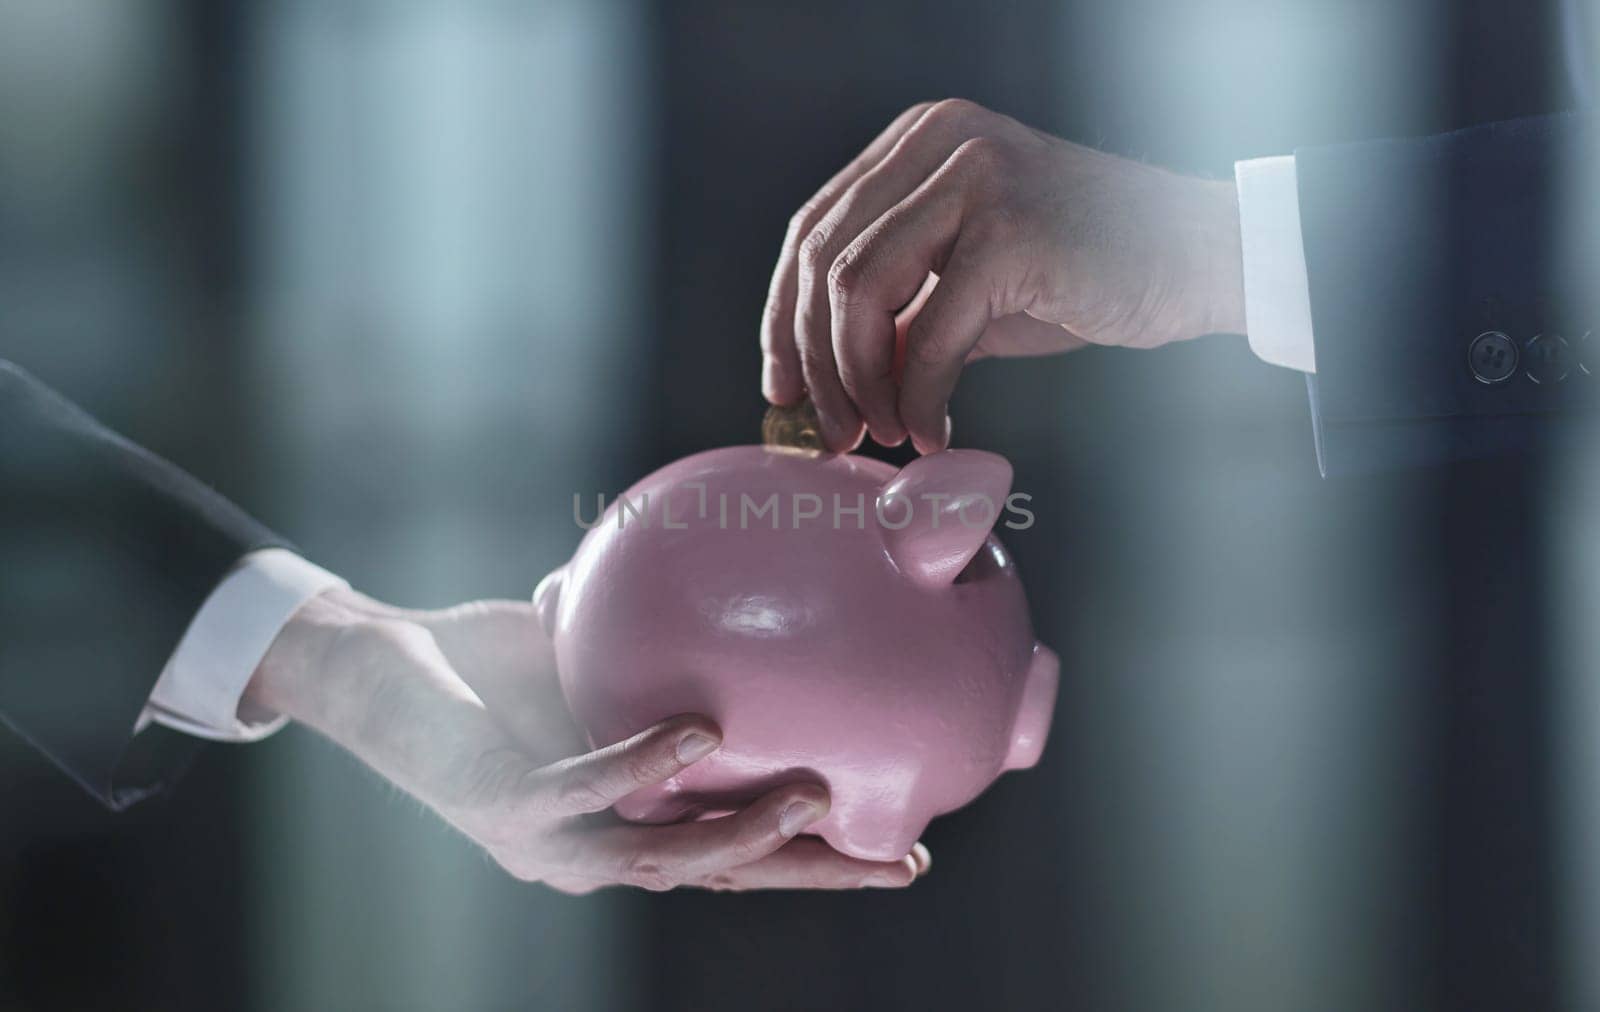 Hand puts a coin in a piggy bank on a black background by Prosto